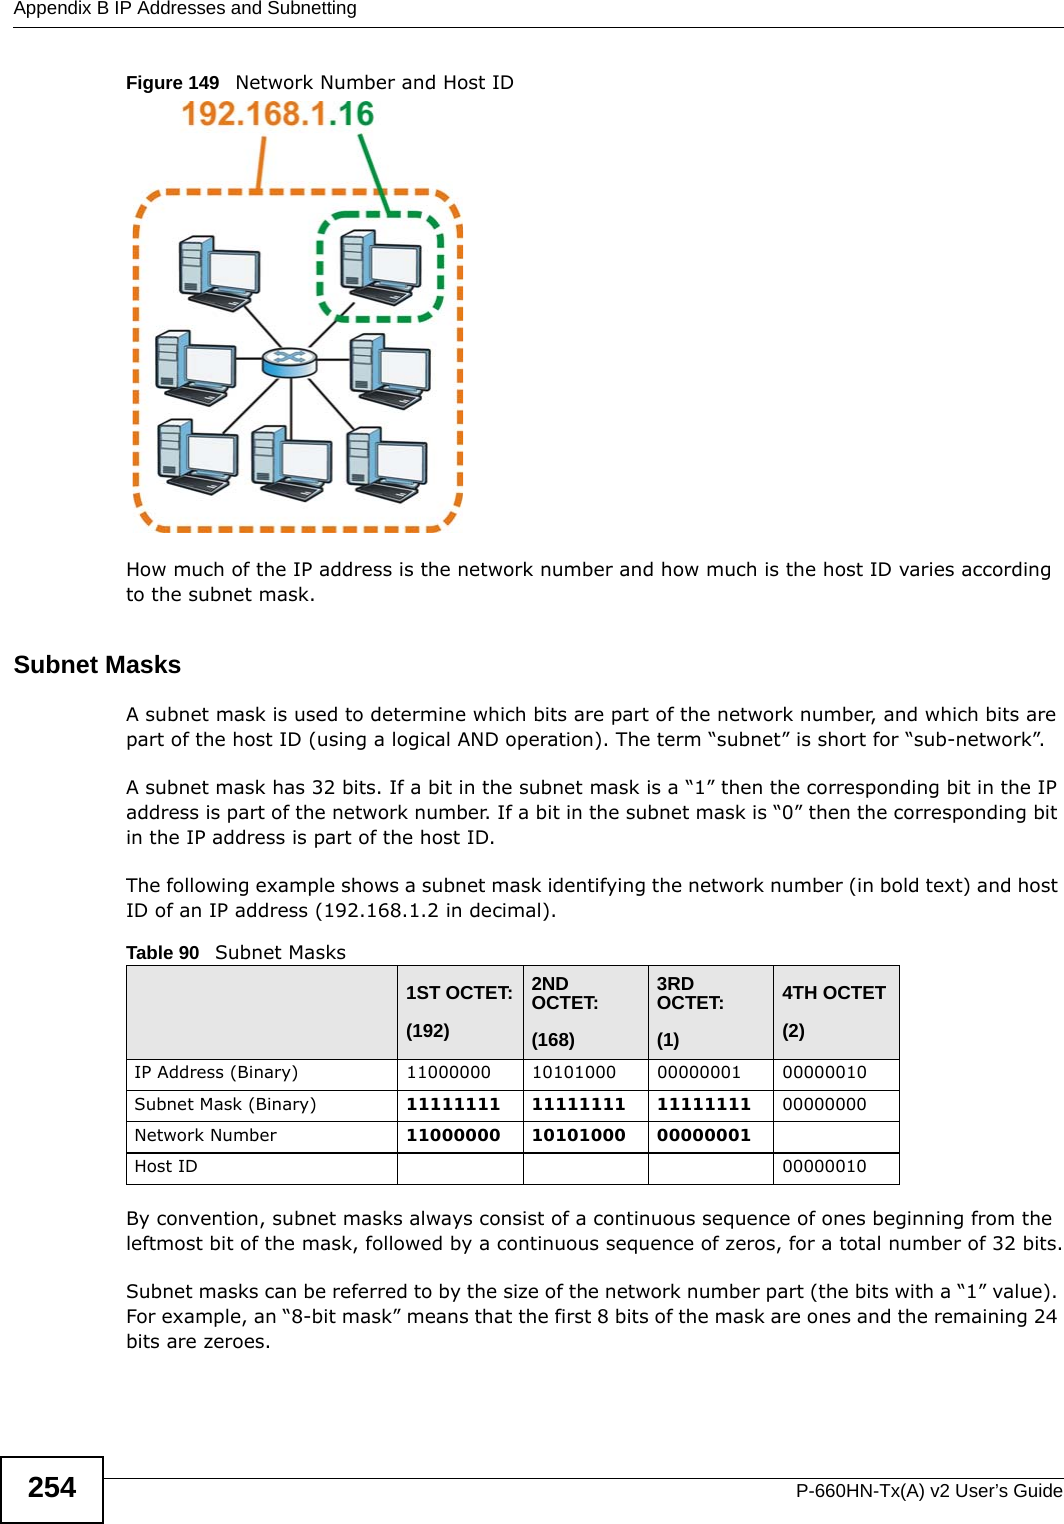 Appendix B IP Addresses and SubnettingP-660HN-Tx(A) v2 User’s Guide254Figure 149   Network Number and Host IDHow much of the IP address is the network number and how much is the host ID varies according to the subnet mask.  Subnet MasksA subnet mask is used to determine which bits are part of the network number, and which bits are part of the host ID (using a logical AND operation). The term “subnet” is short for “sub-network”.A subnet mask has 32 bits. If a bit in the subnet mask is a “1” then the corresponding bit in the IP address is part of the network number. If a bit in the subnet mask is “0” then the corresponding bit in the IP address is part of the host ID. The following example shows a subnet mask identifying the network number (in bold text) and host ID of an IP address (192.168.1.2 in decimal).By convention, subnet masks always consist of a continuous sequence of ones beginning from the leftmost bit of the mask, followed by a continuous sequence of zeros, for a total number of 32 bits.Subnet masks can be referred to by the size of the network number part (the bits with a “1” value). For example, an “8-bit mask” means that the first 8 bits of the mask are ones and the remaining 24 bits are zeroes.Table 90   Subnet Masks1ST OCTET:(192)2ND OCTET:(168)3RD OCTET:(1)4TH OCTET(2)IP Address (Binary) 11000000 10101000 00000001 00000010Subnet Mask (Binary) 11111111 11111111 11111111 00000000Network Number 11000000 10101000 00000001Host ID 00000010